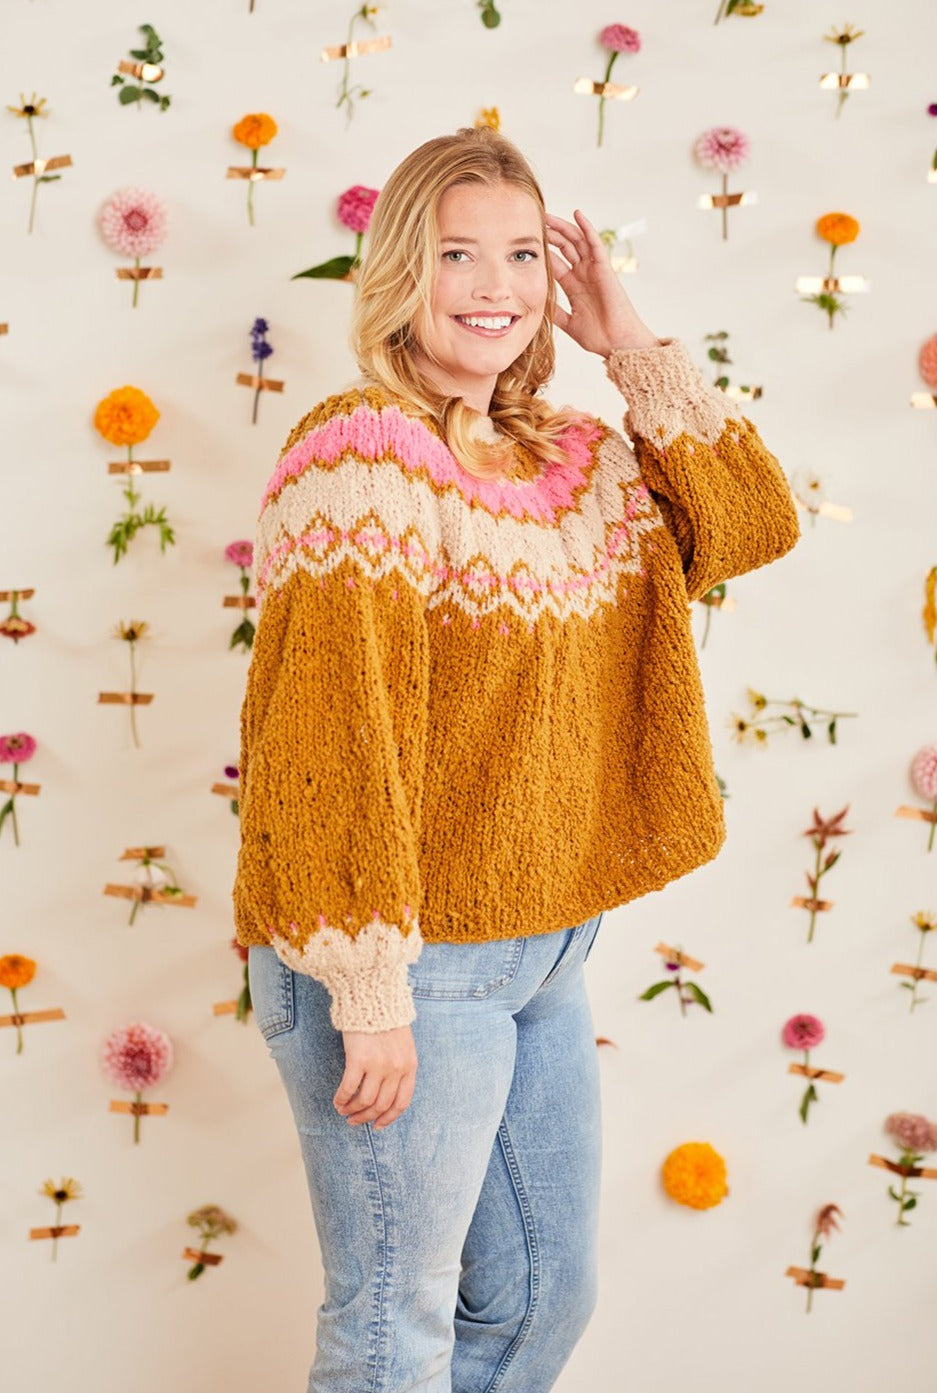 Express Yourself Sweater Kit